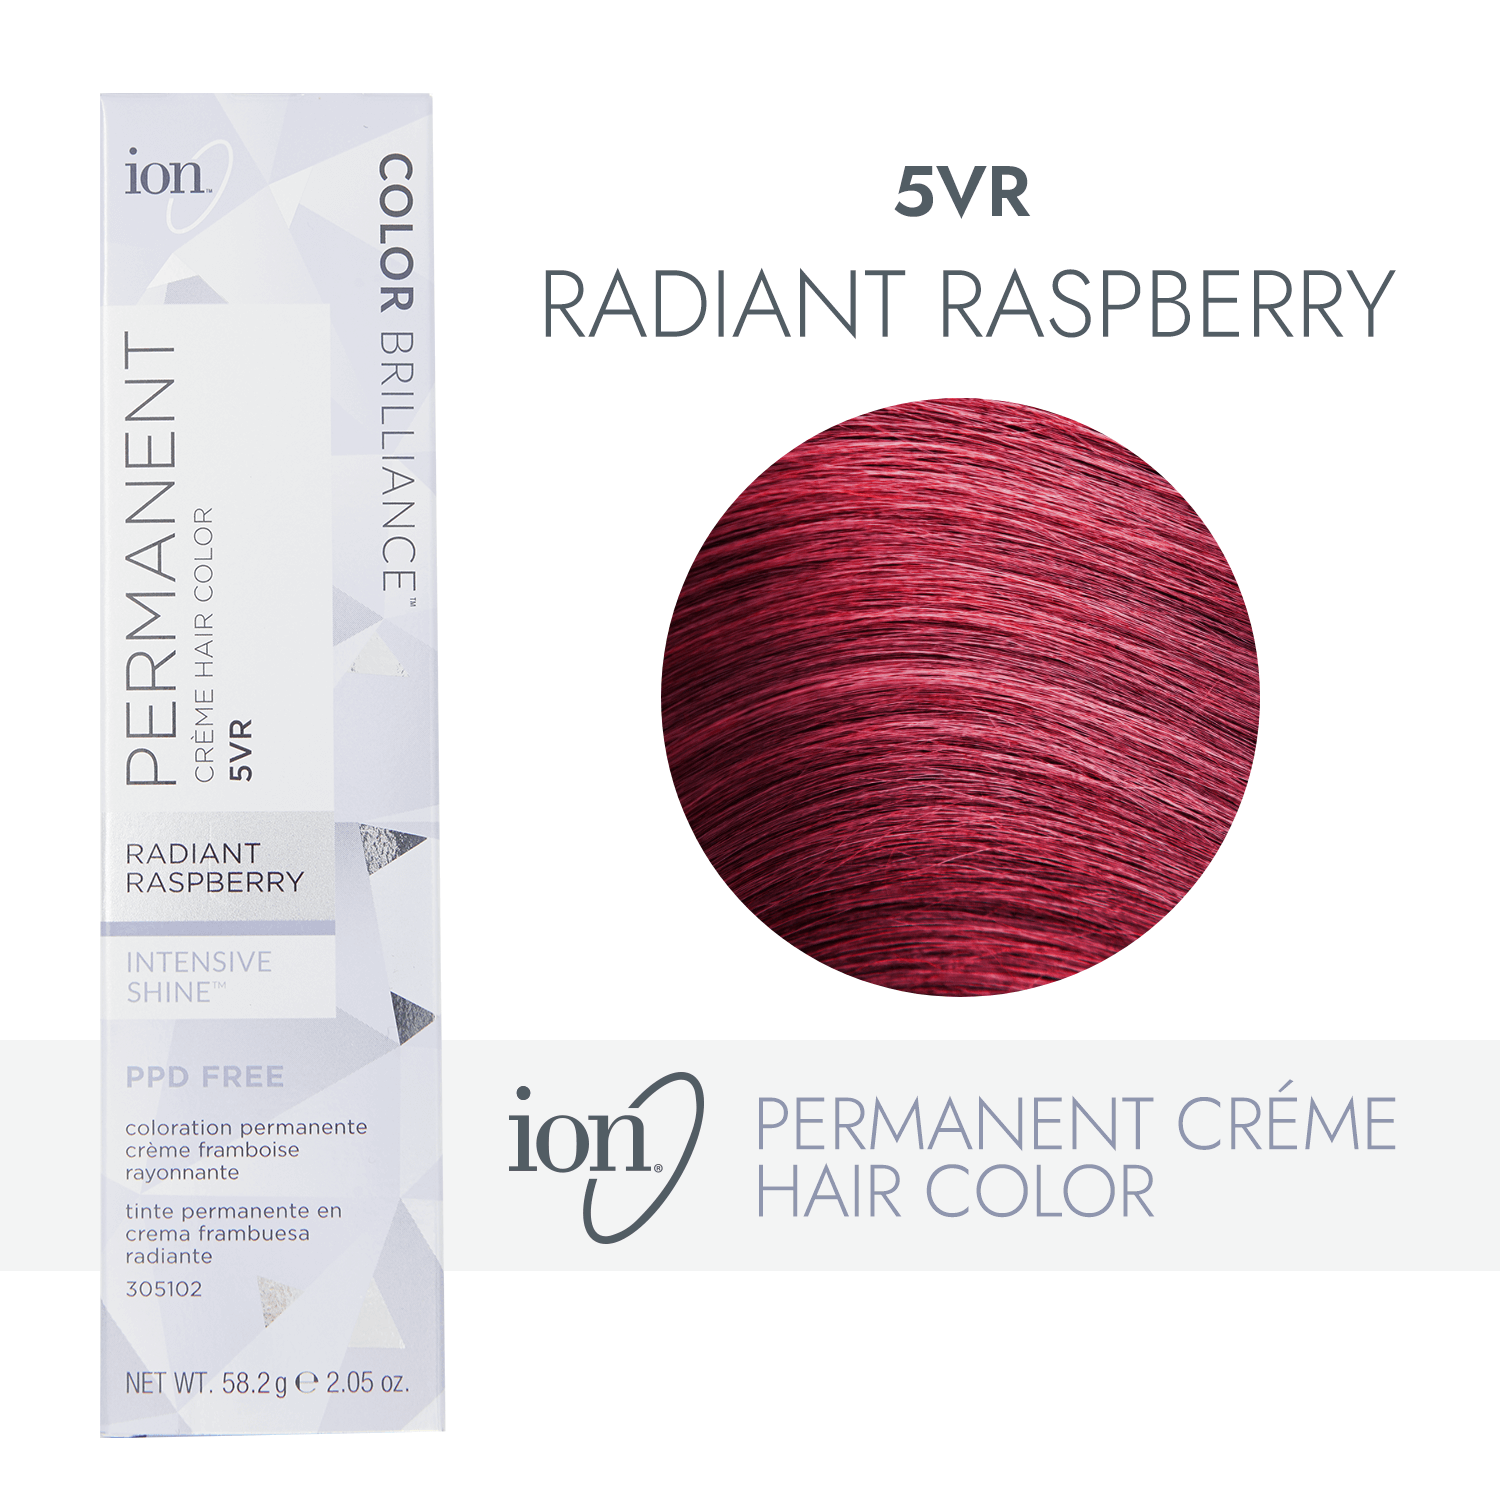 5vr hair color ion